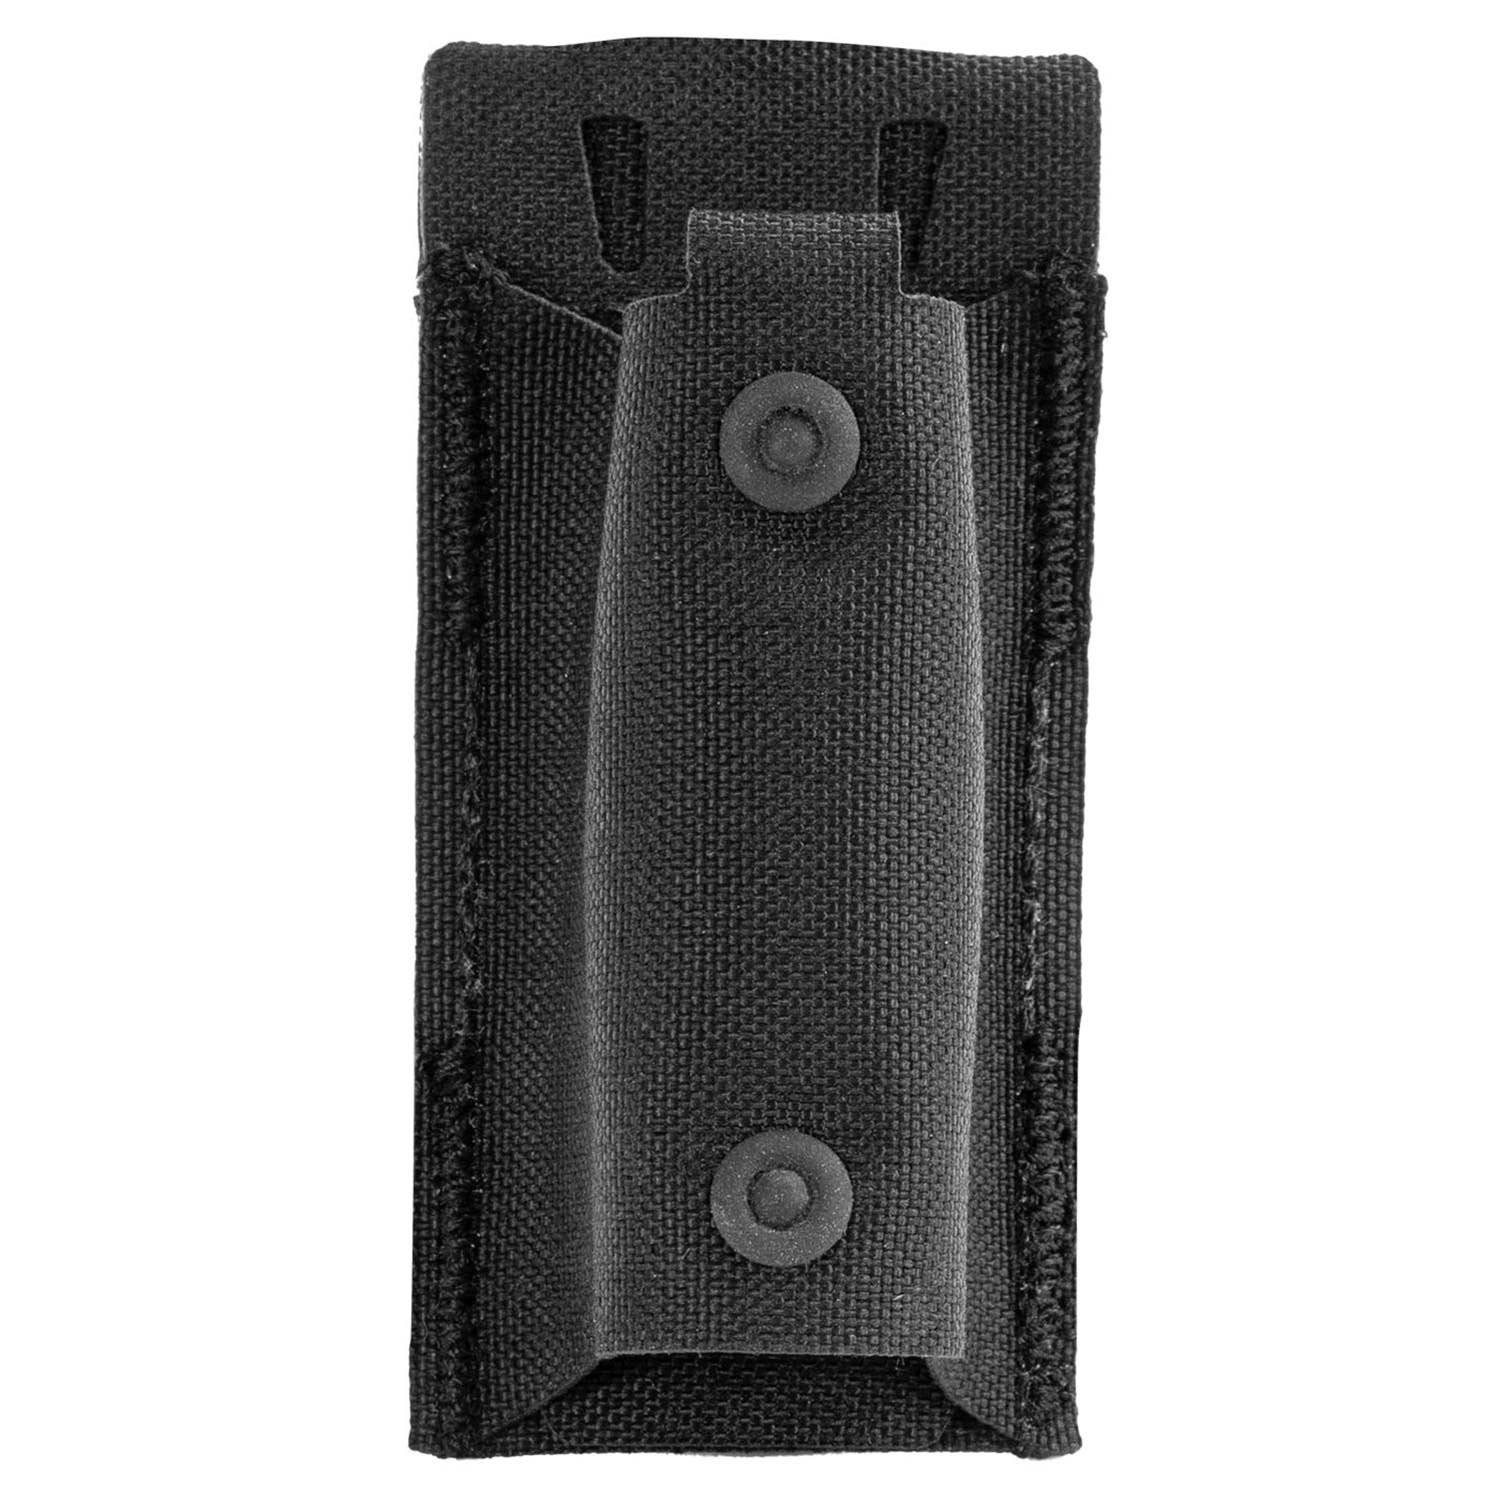 POINT BLANK SMALL FLASHLIGHT POUCH